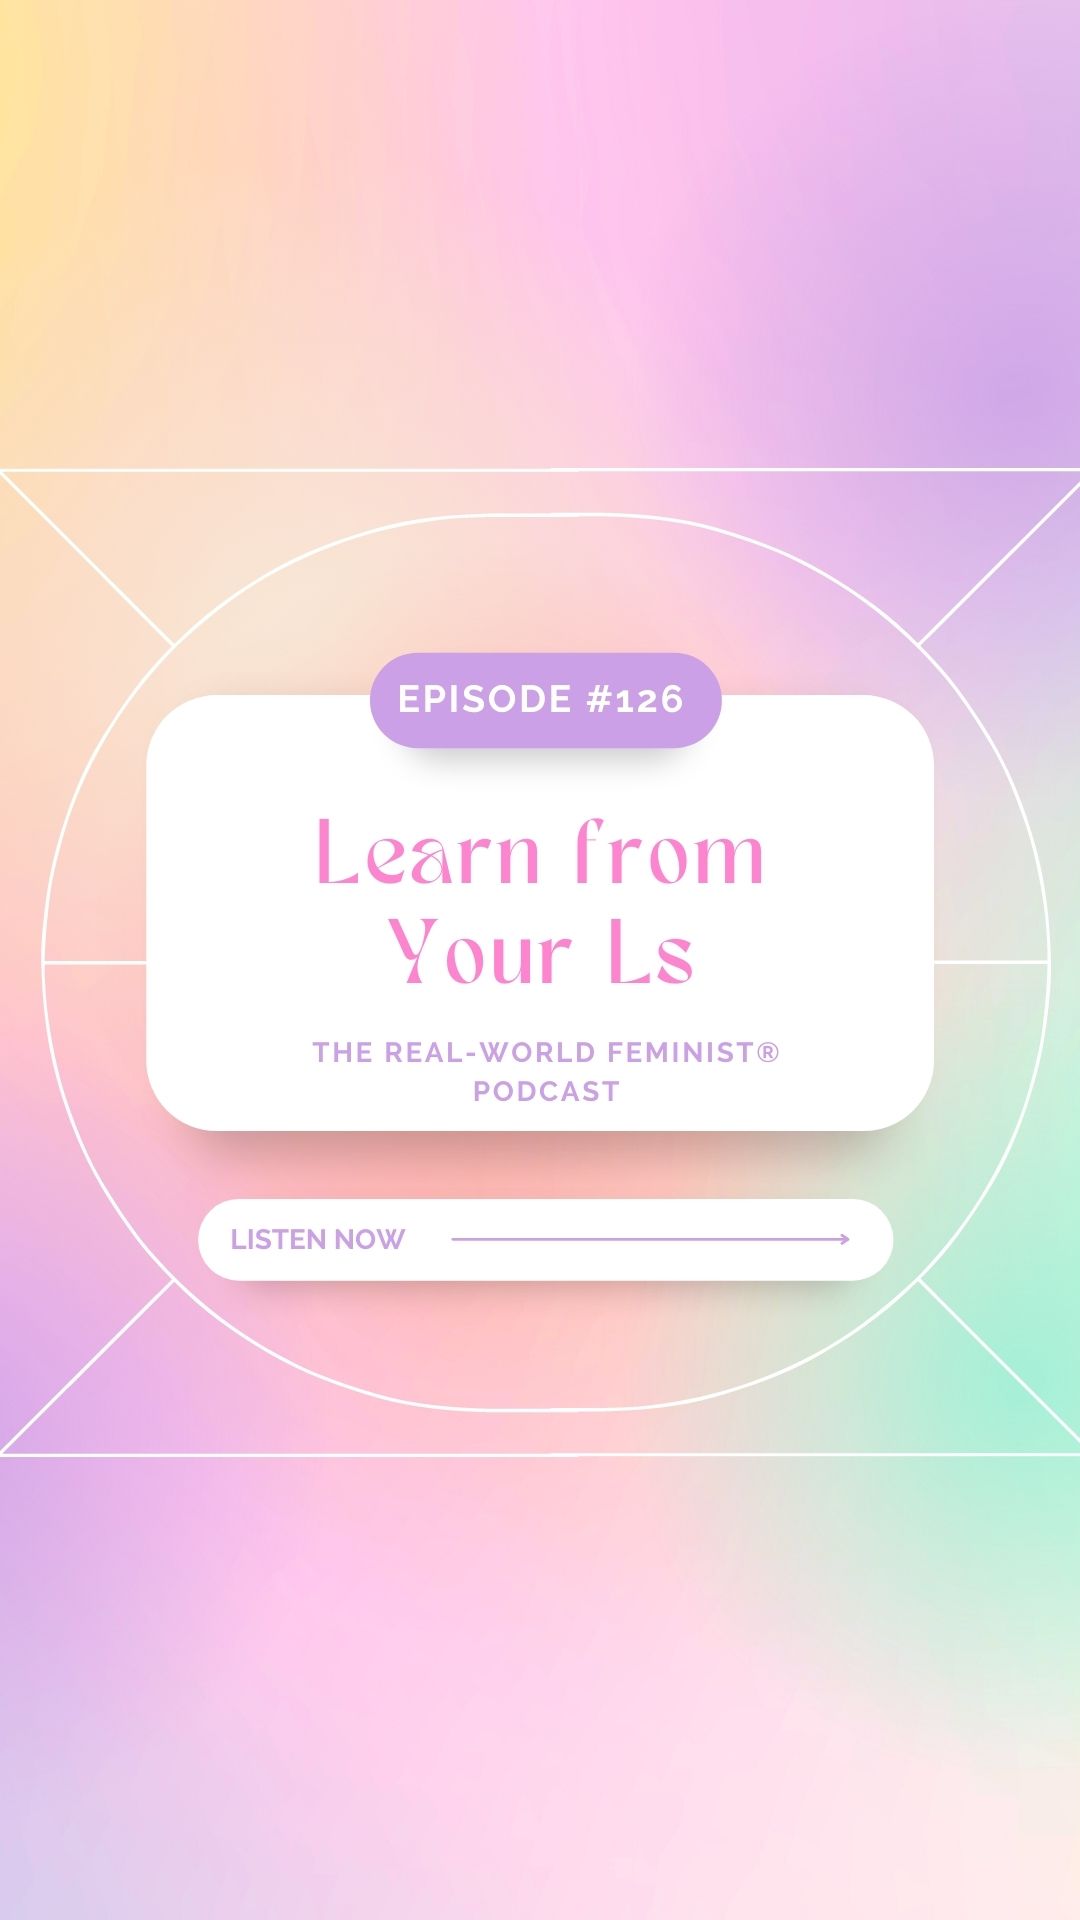 Episode #126: Learn from Your Ls